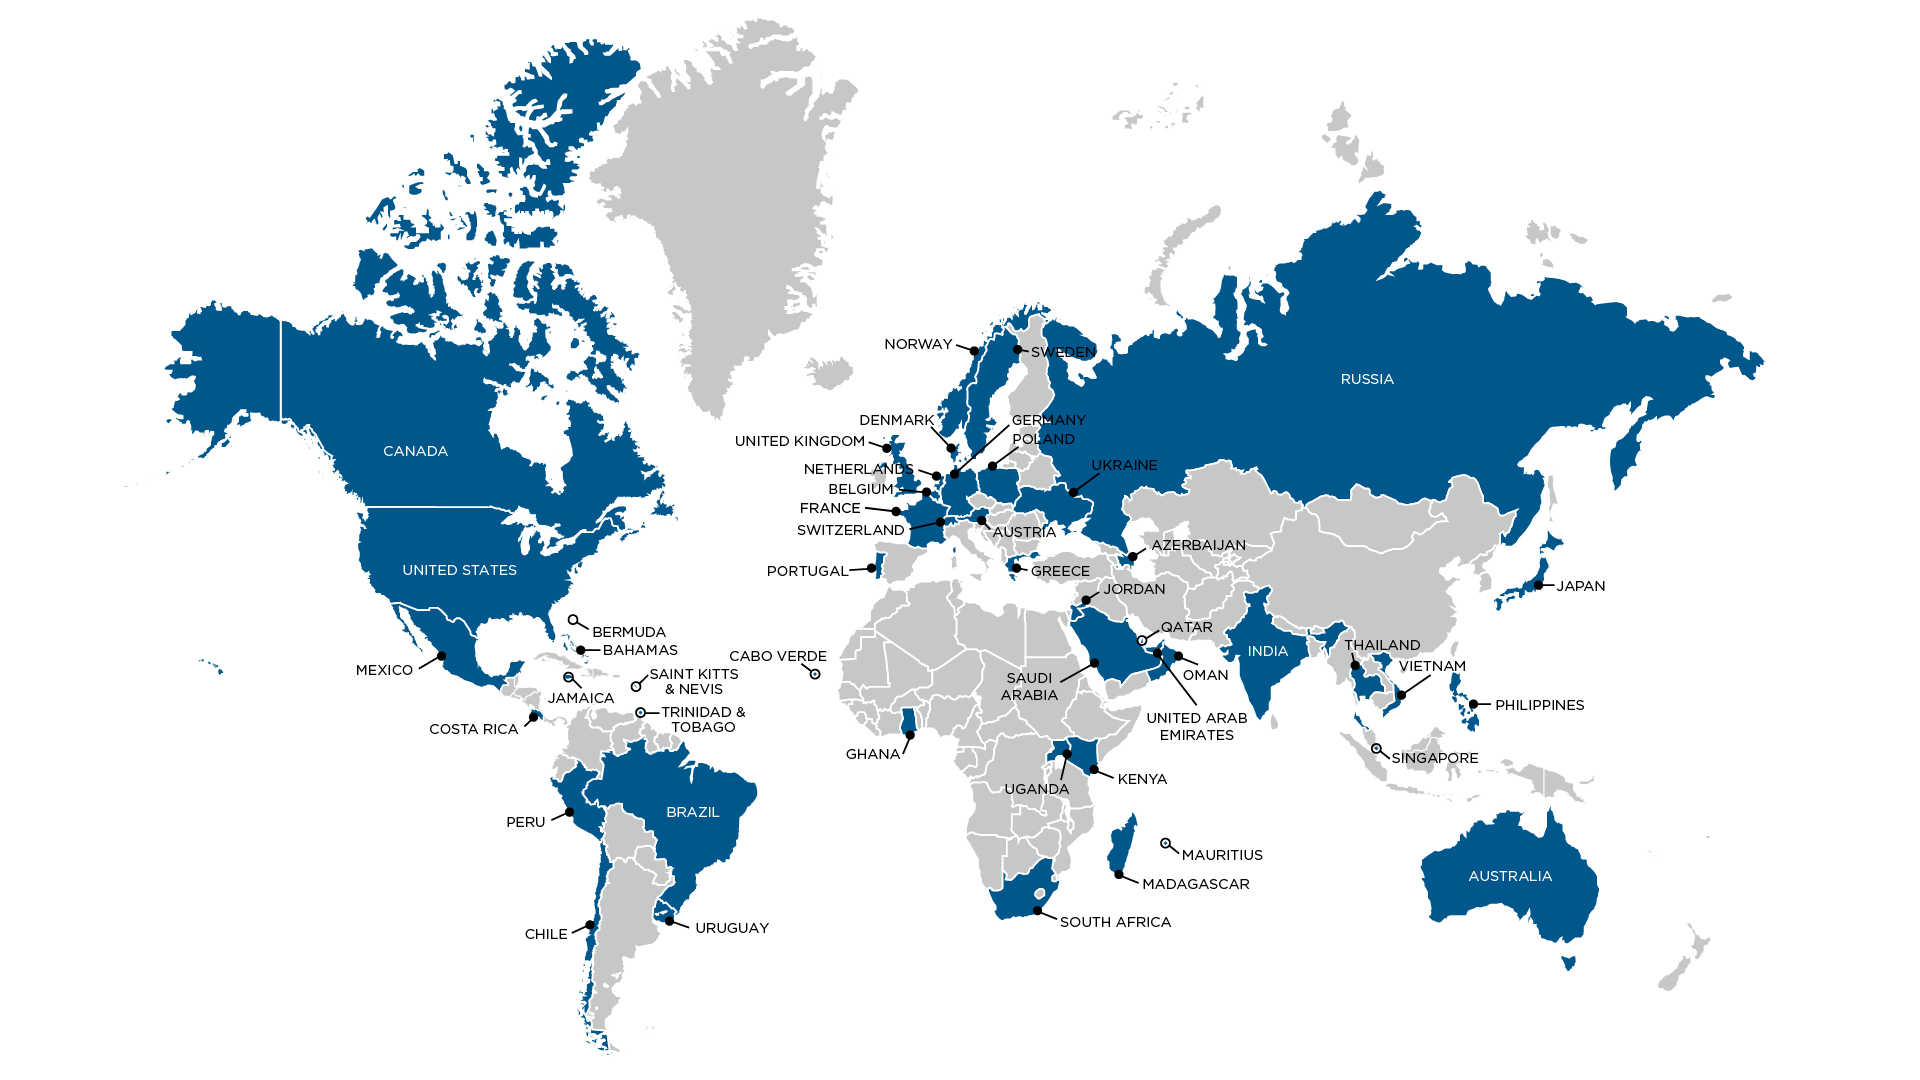 CPTM alumni can be found in 48 countries across the globe.